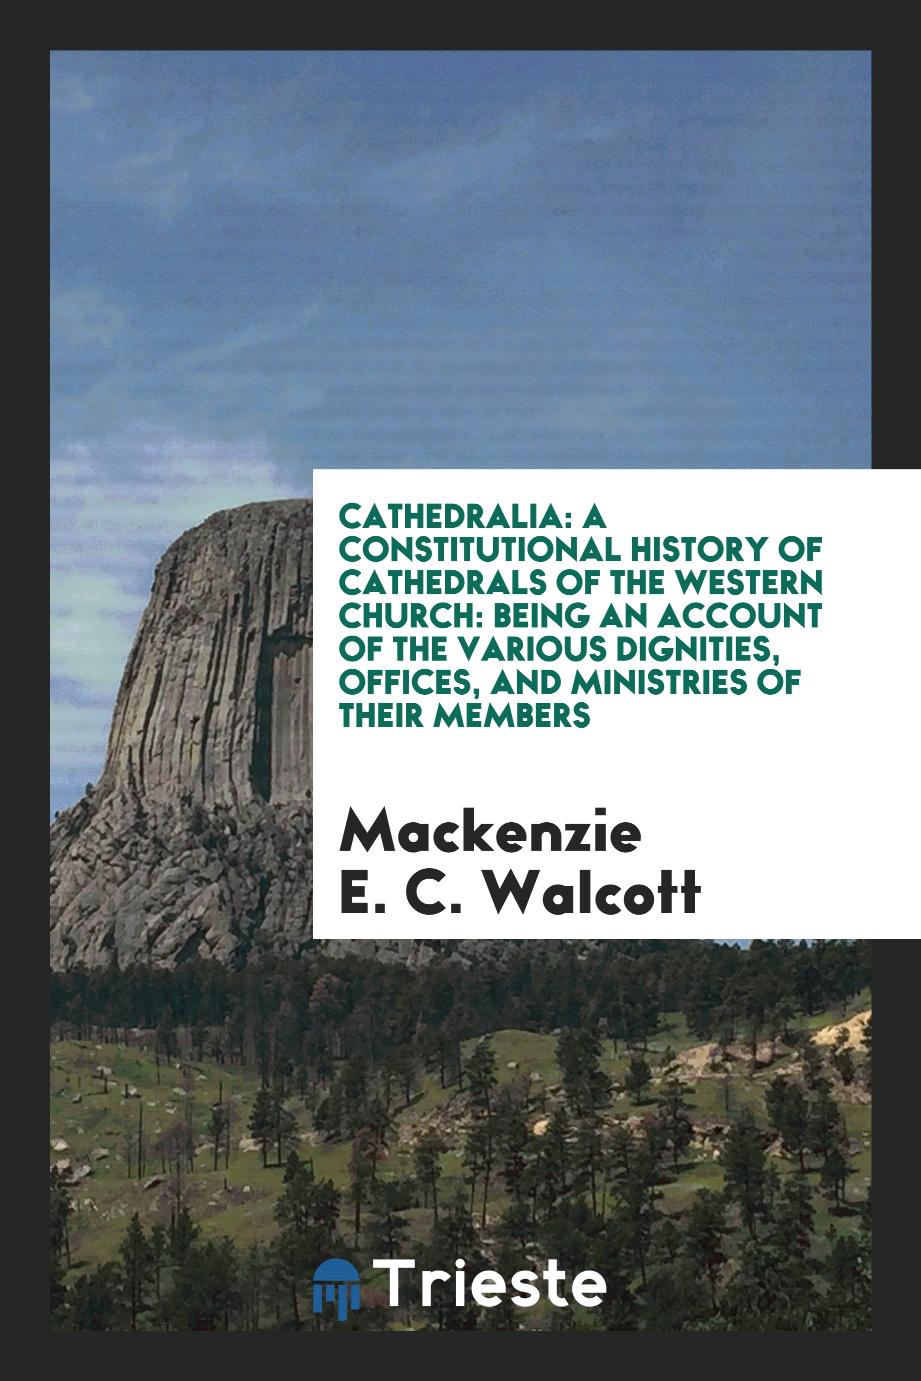 Cathedralia: A Constitutional History of Cathedrals of the Western Church: Being an Account of the Various Dignities, Offices, and Ministries of Their Members